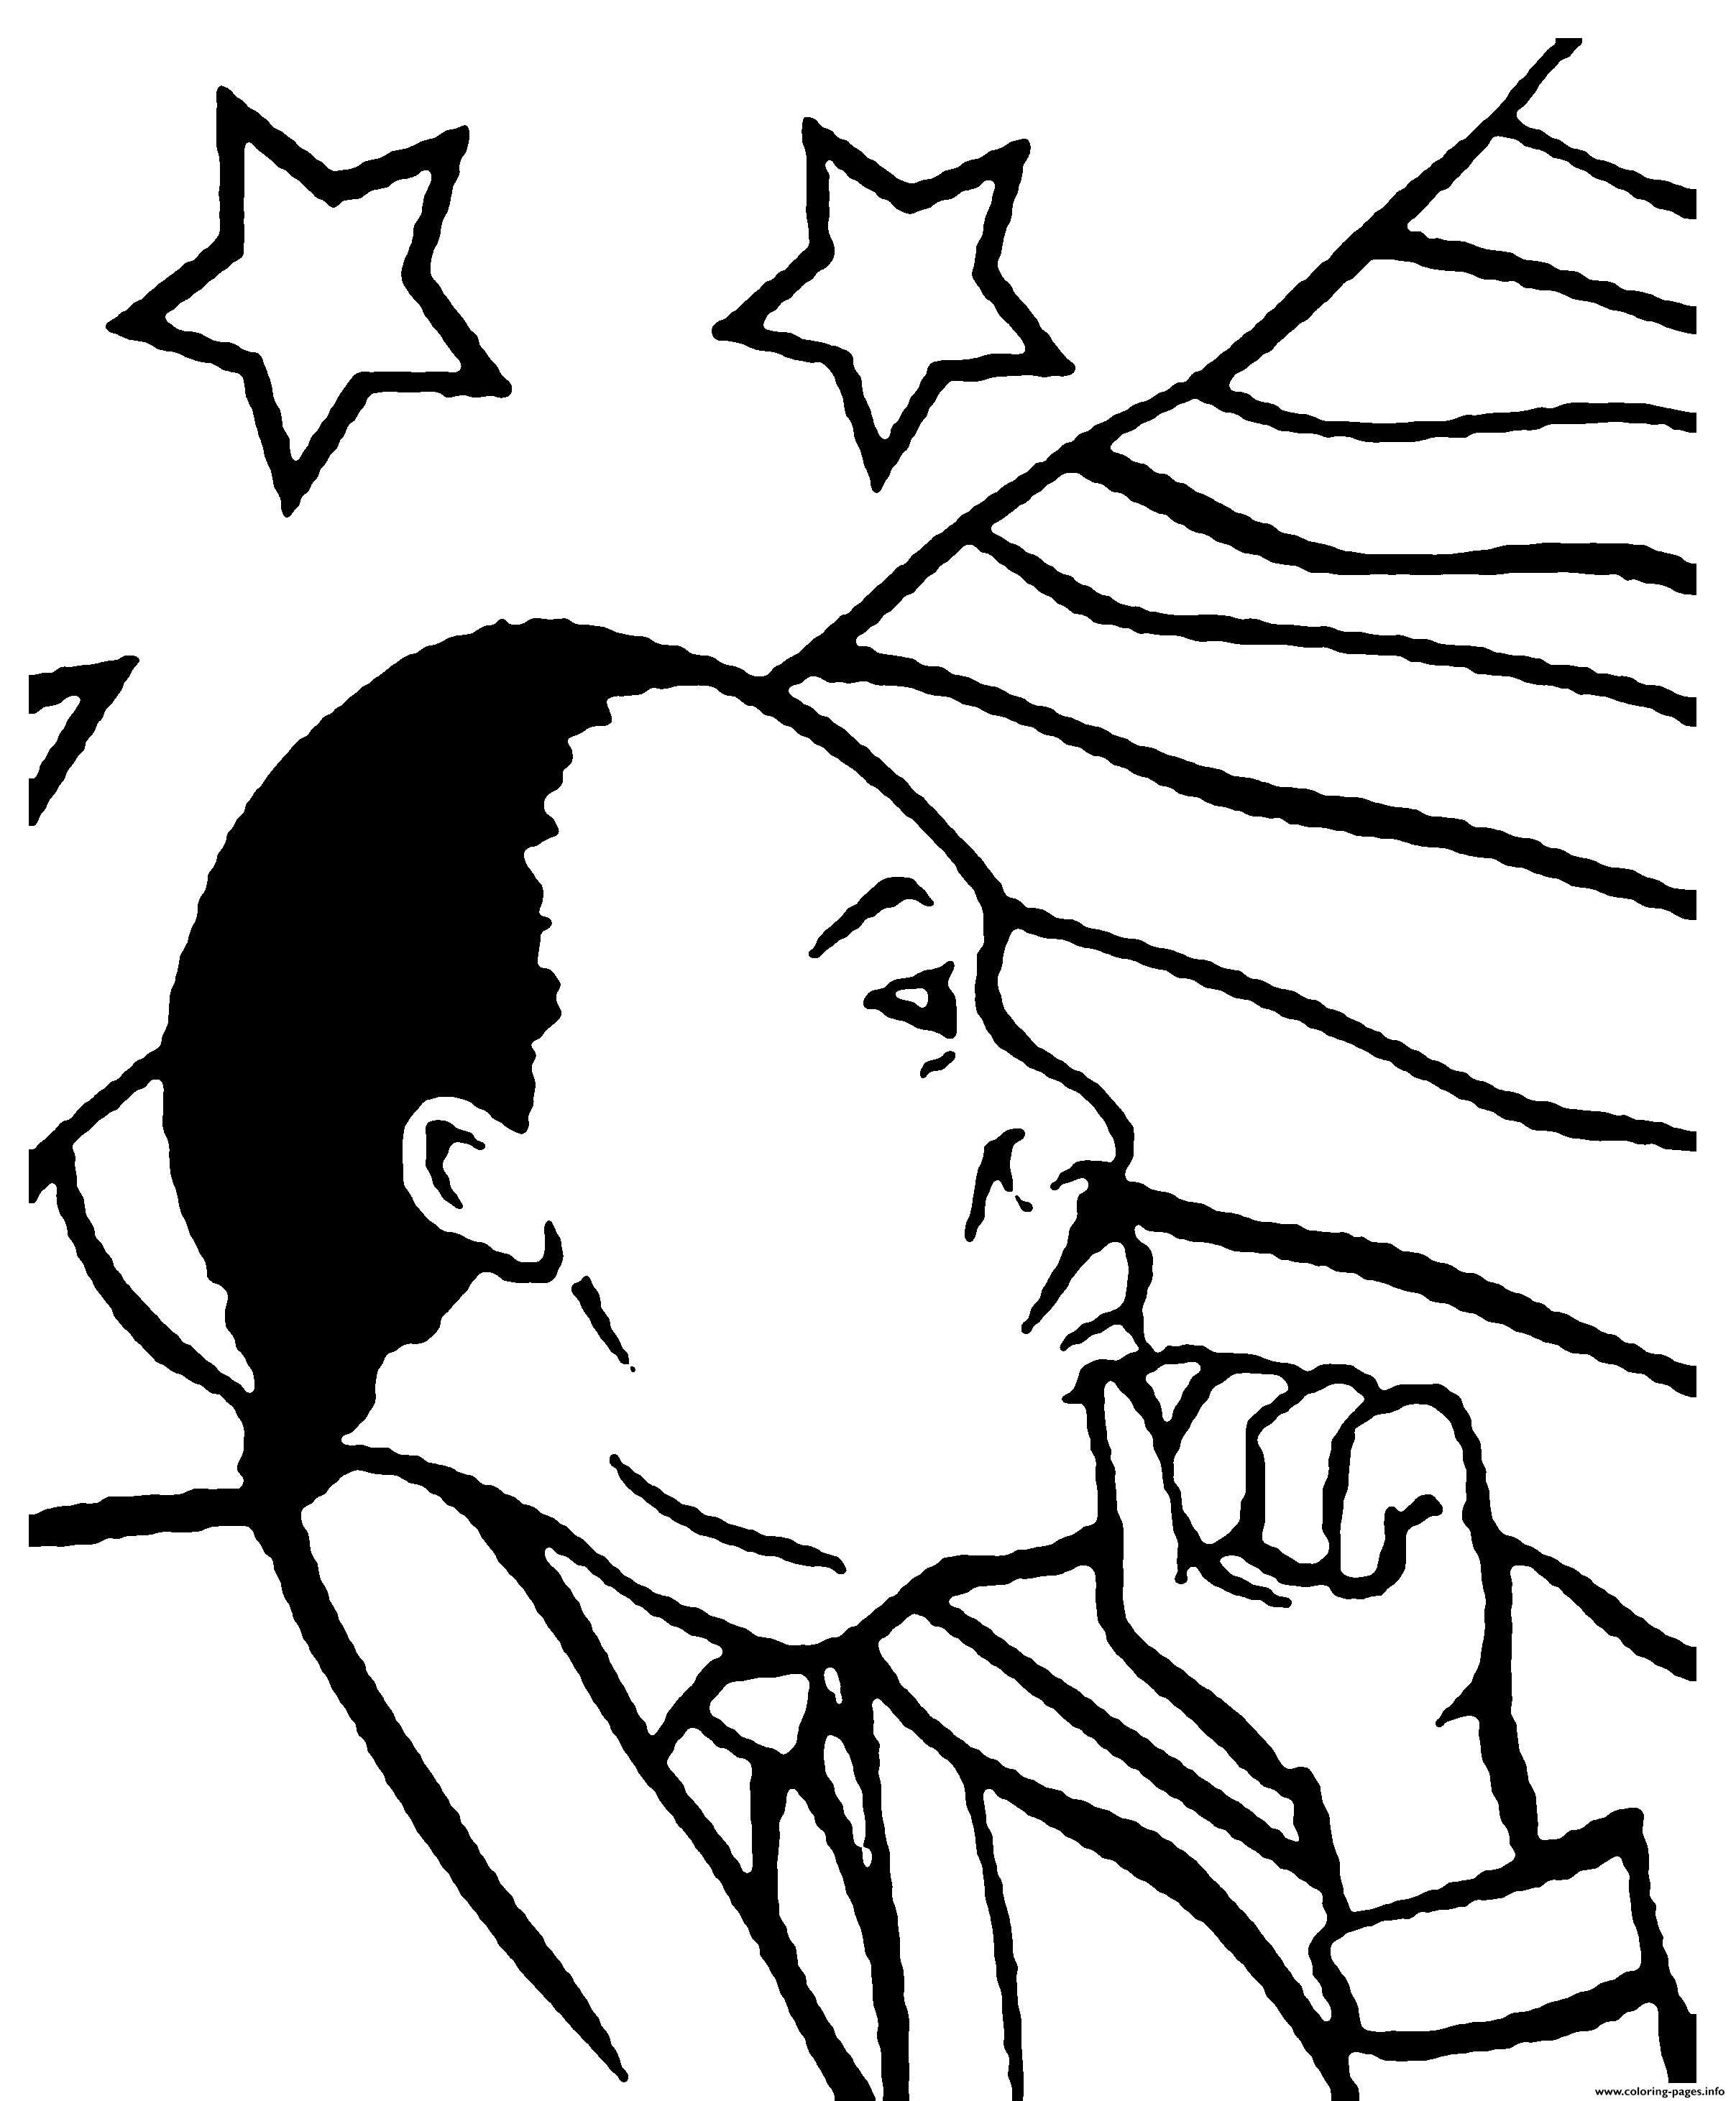 Black History Martin Luther King Day coloring pages